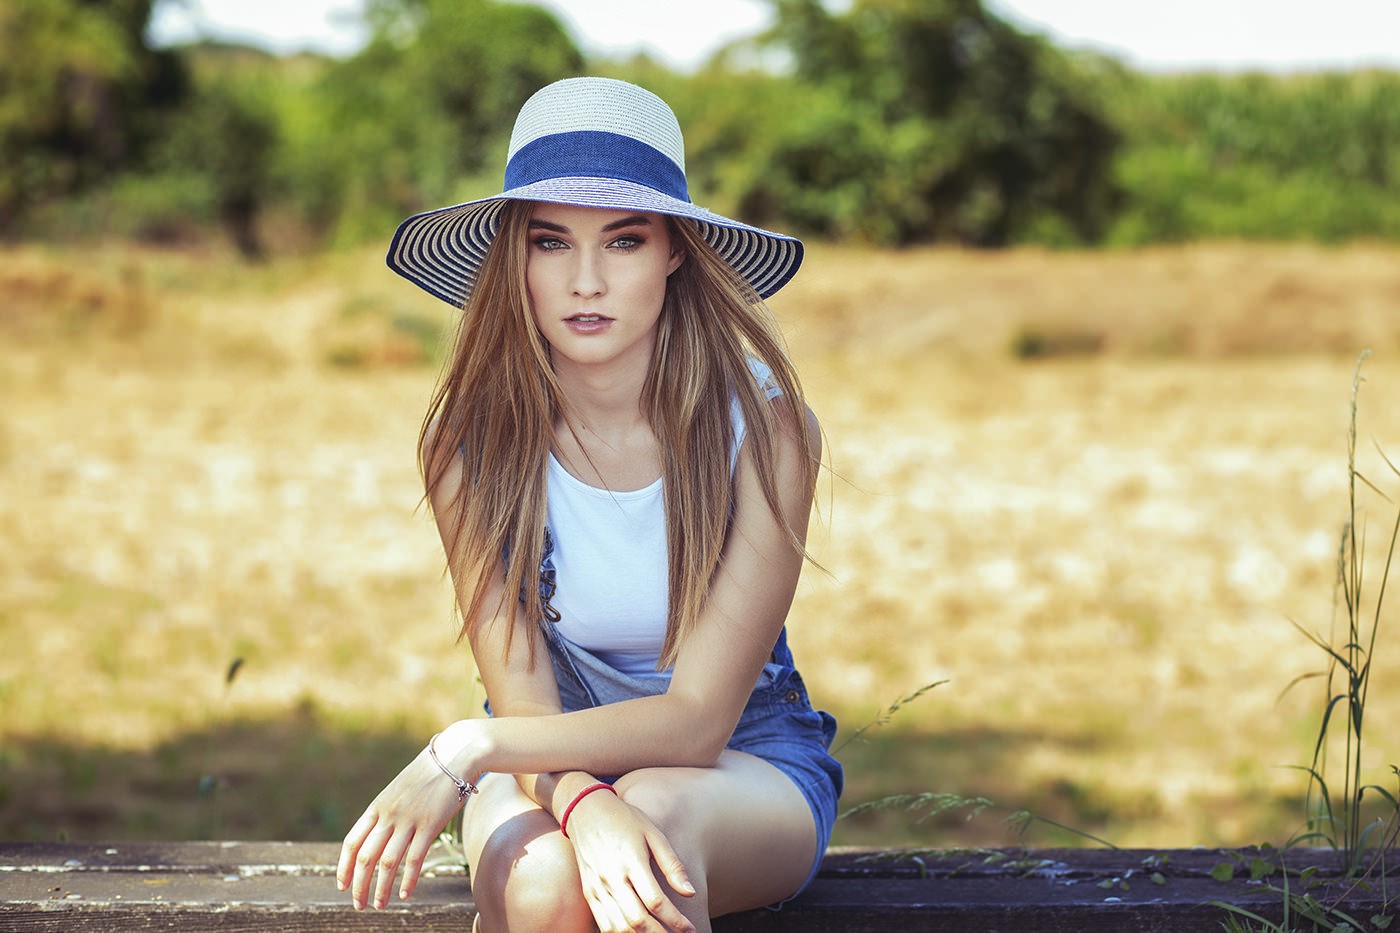 People 1400x933 women sitting hat overalls women outdoors blonde looking at viewer millinery long hair straight hair women with hats model celebrity white tops jeans outdoors